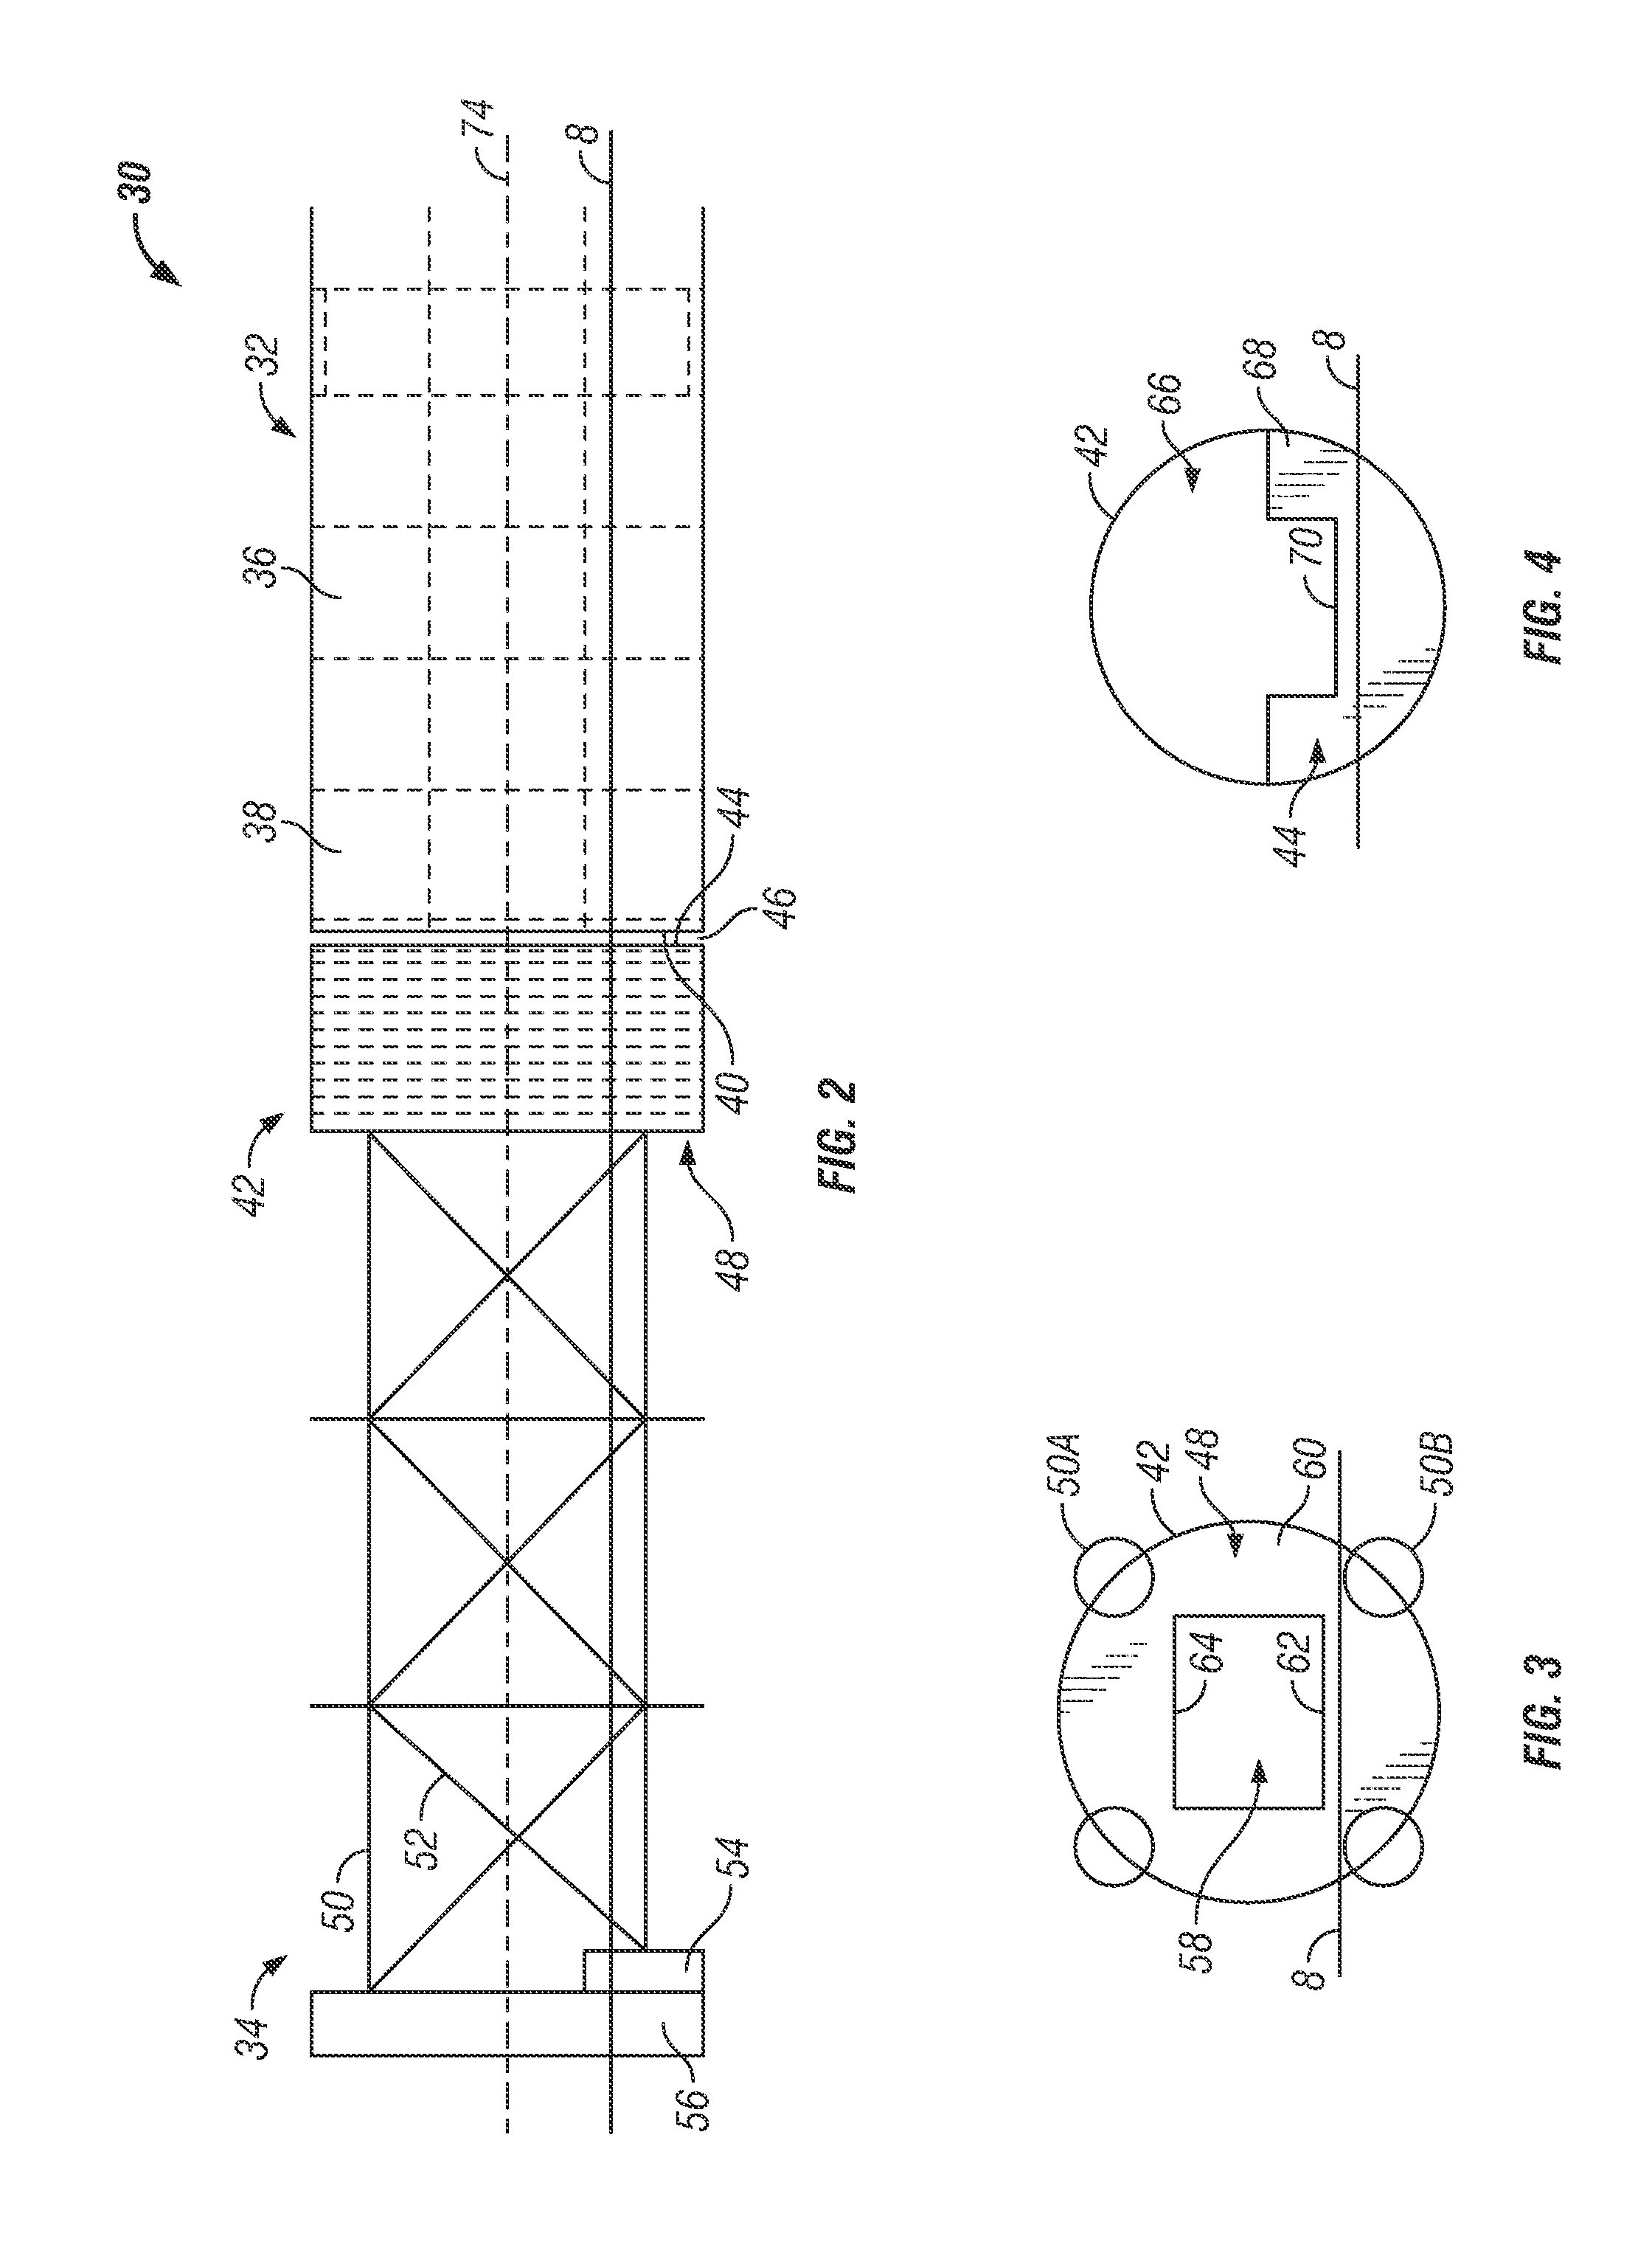 System and method for multi-sectional truss spar hull for offshore floating structure